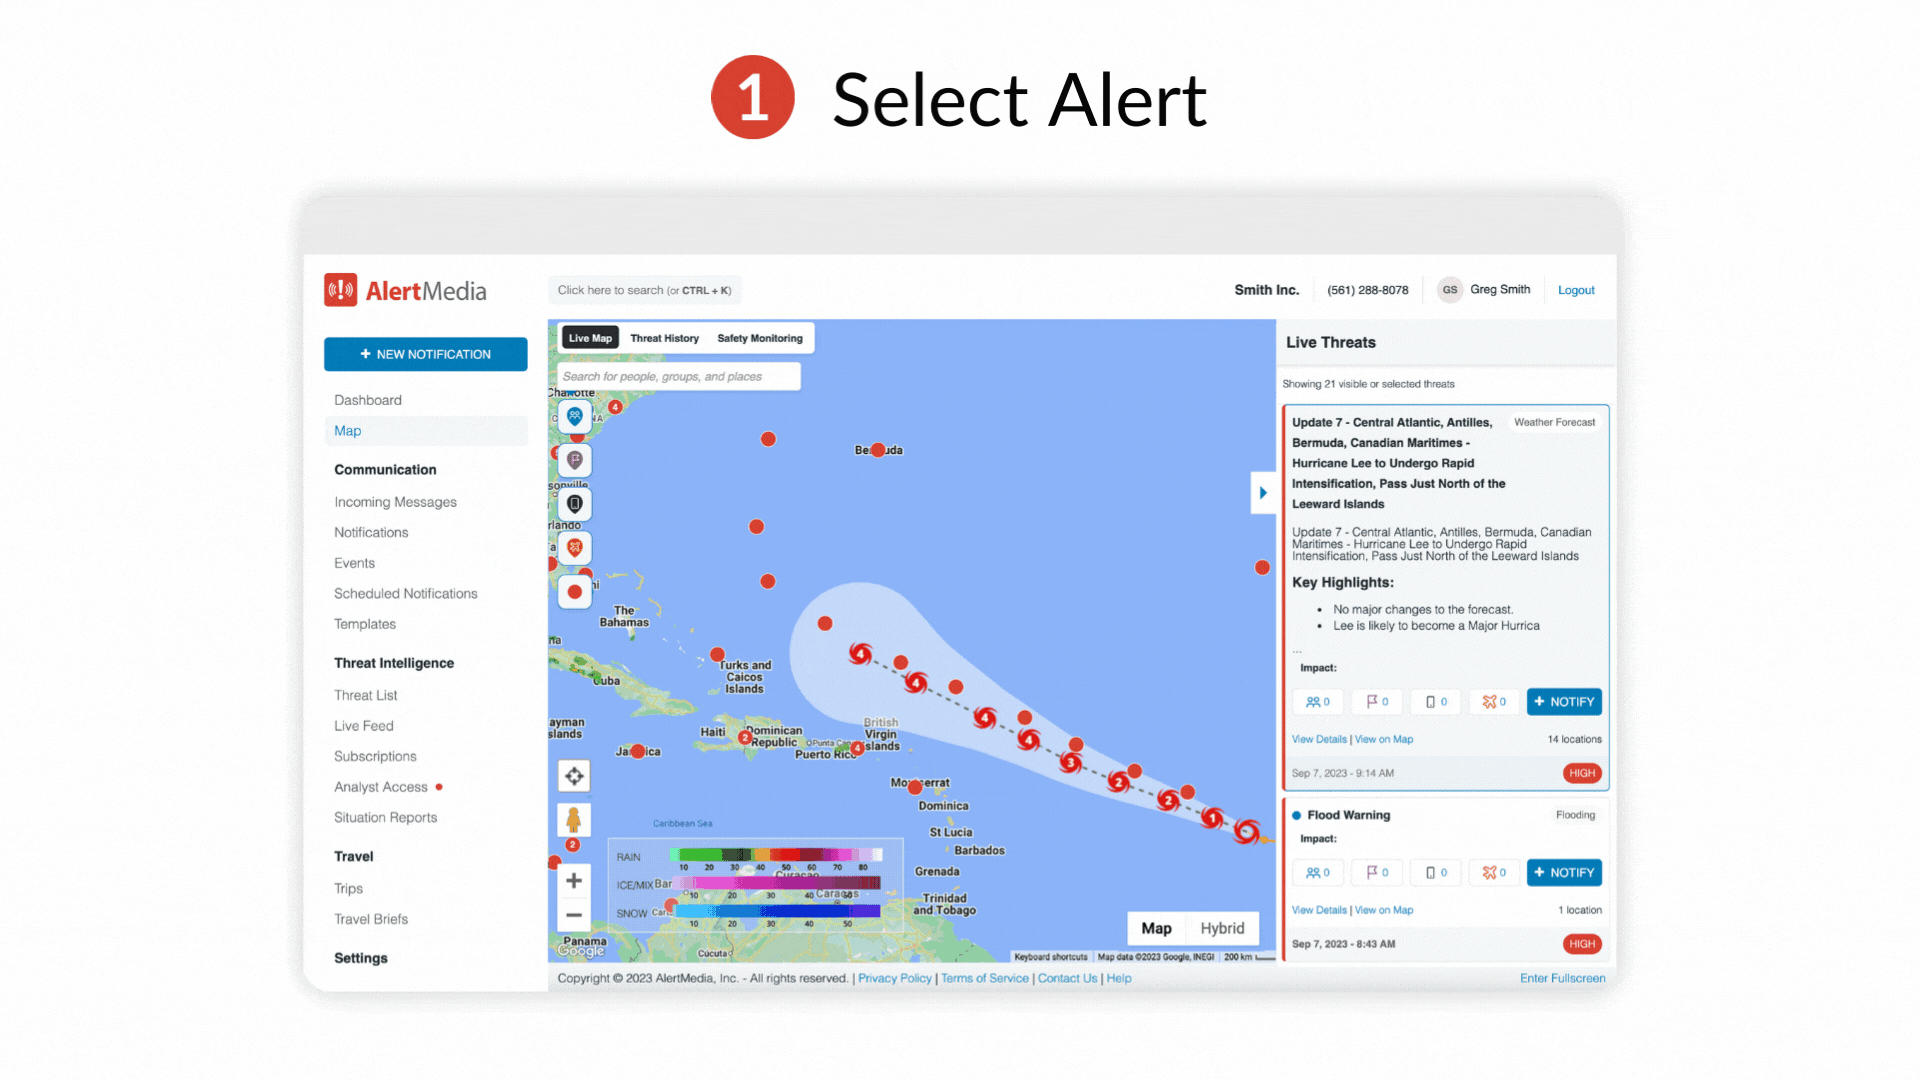 This GIF shows the process of sending a notification to employees about an incoming huricane